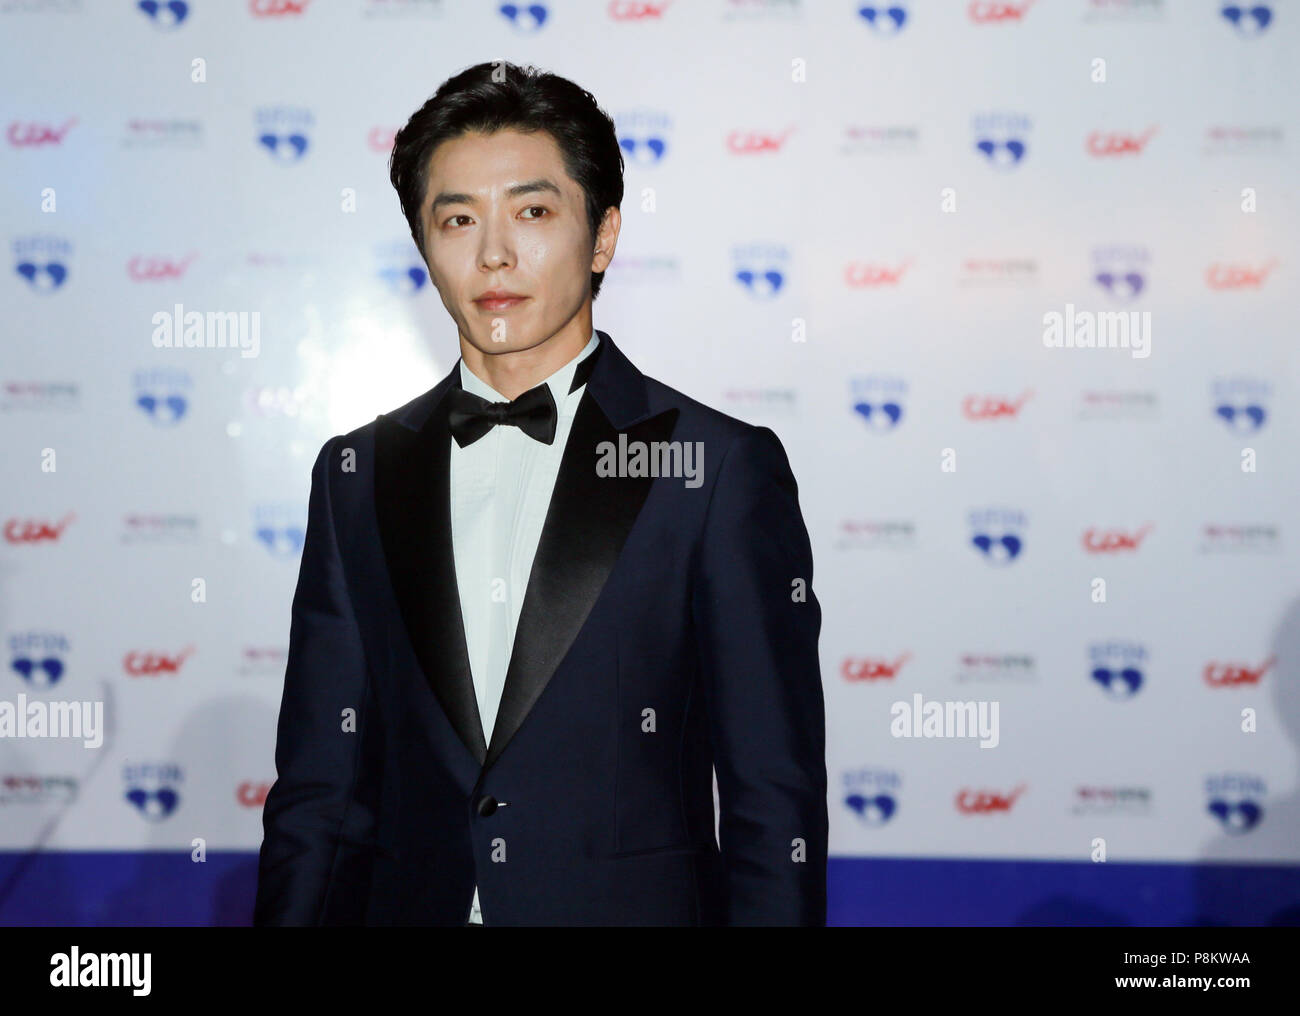 Bucheon, South Korea. 12th July, 2018. South Korean actor Kim Jae-wook appears at the 22nd Bucheon International Fantastic Film Festival red carpet in Bucheon, South Korea, July 12, 2018. The 10-day 22nd Bucheon International Fantastic Film Festival, with its theme as 'Love, Fantasy and Adventure', kicked off here Thursday. Credit: Wang Jingqiang/Xinhua/Alamy Live News Stock Photo